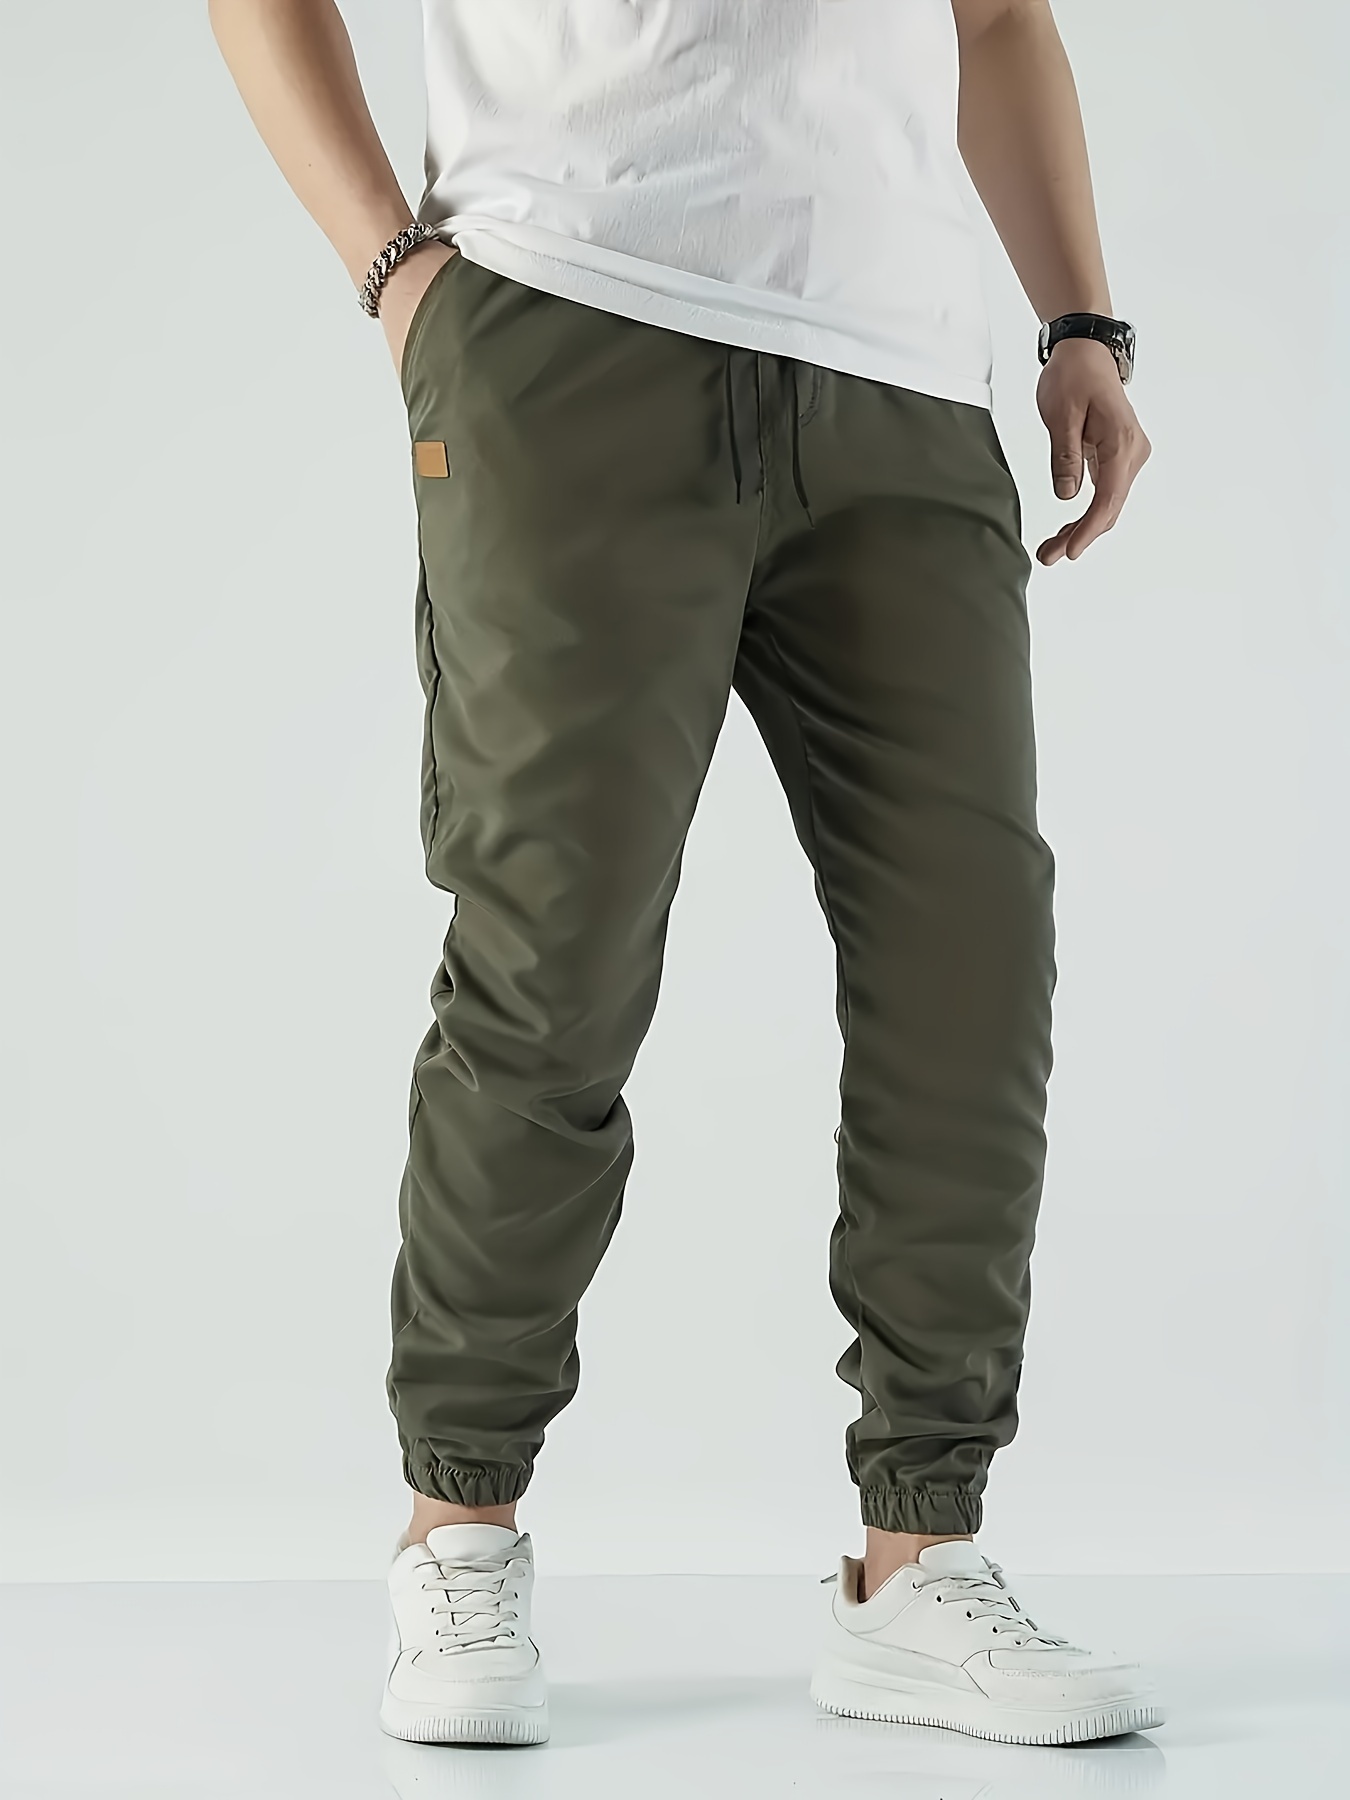 Here's To You Pants, Olive  Plus size joggers, Jogger pants casual, Plus  size